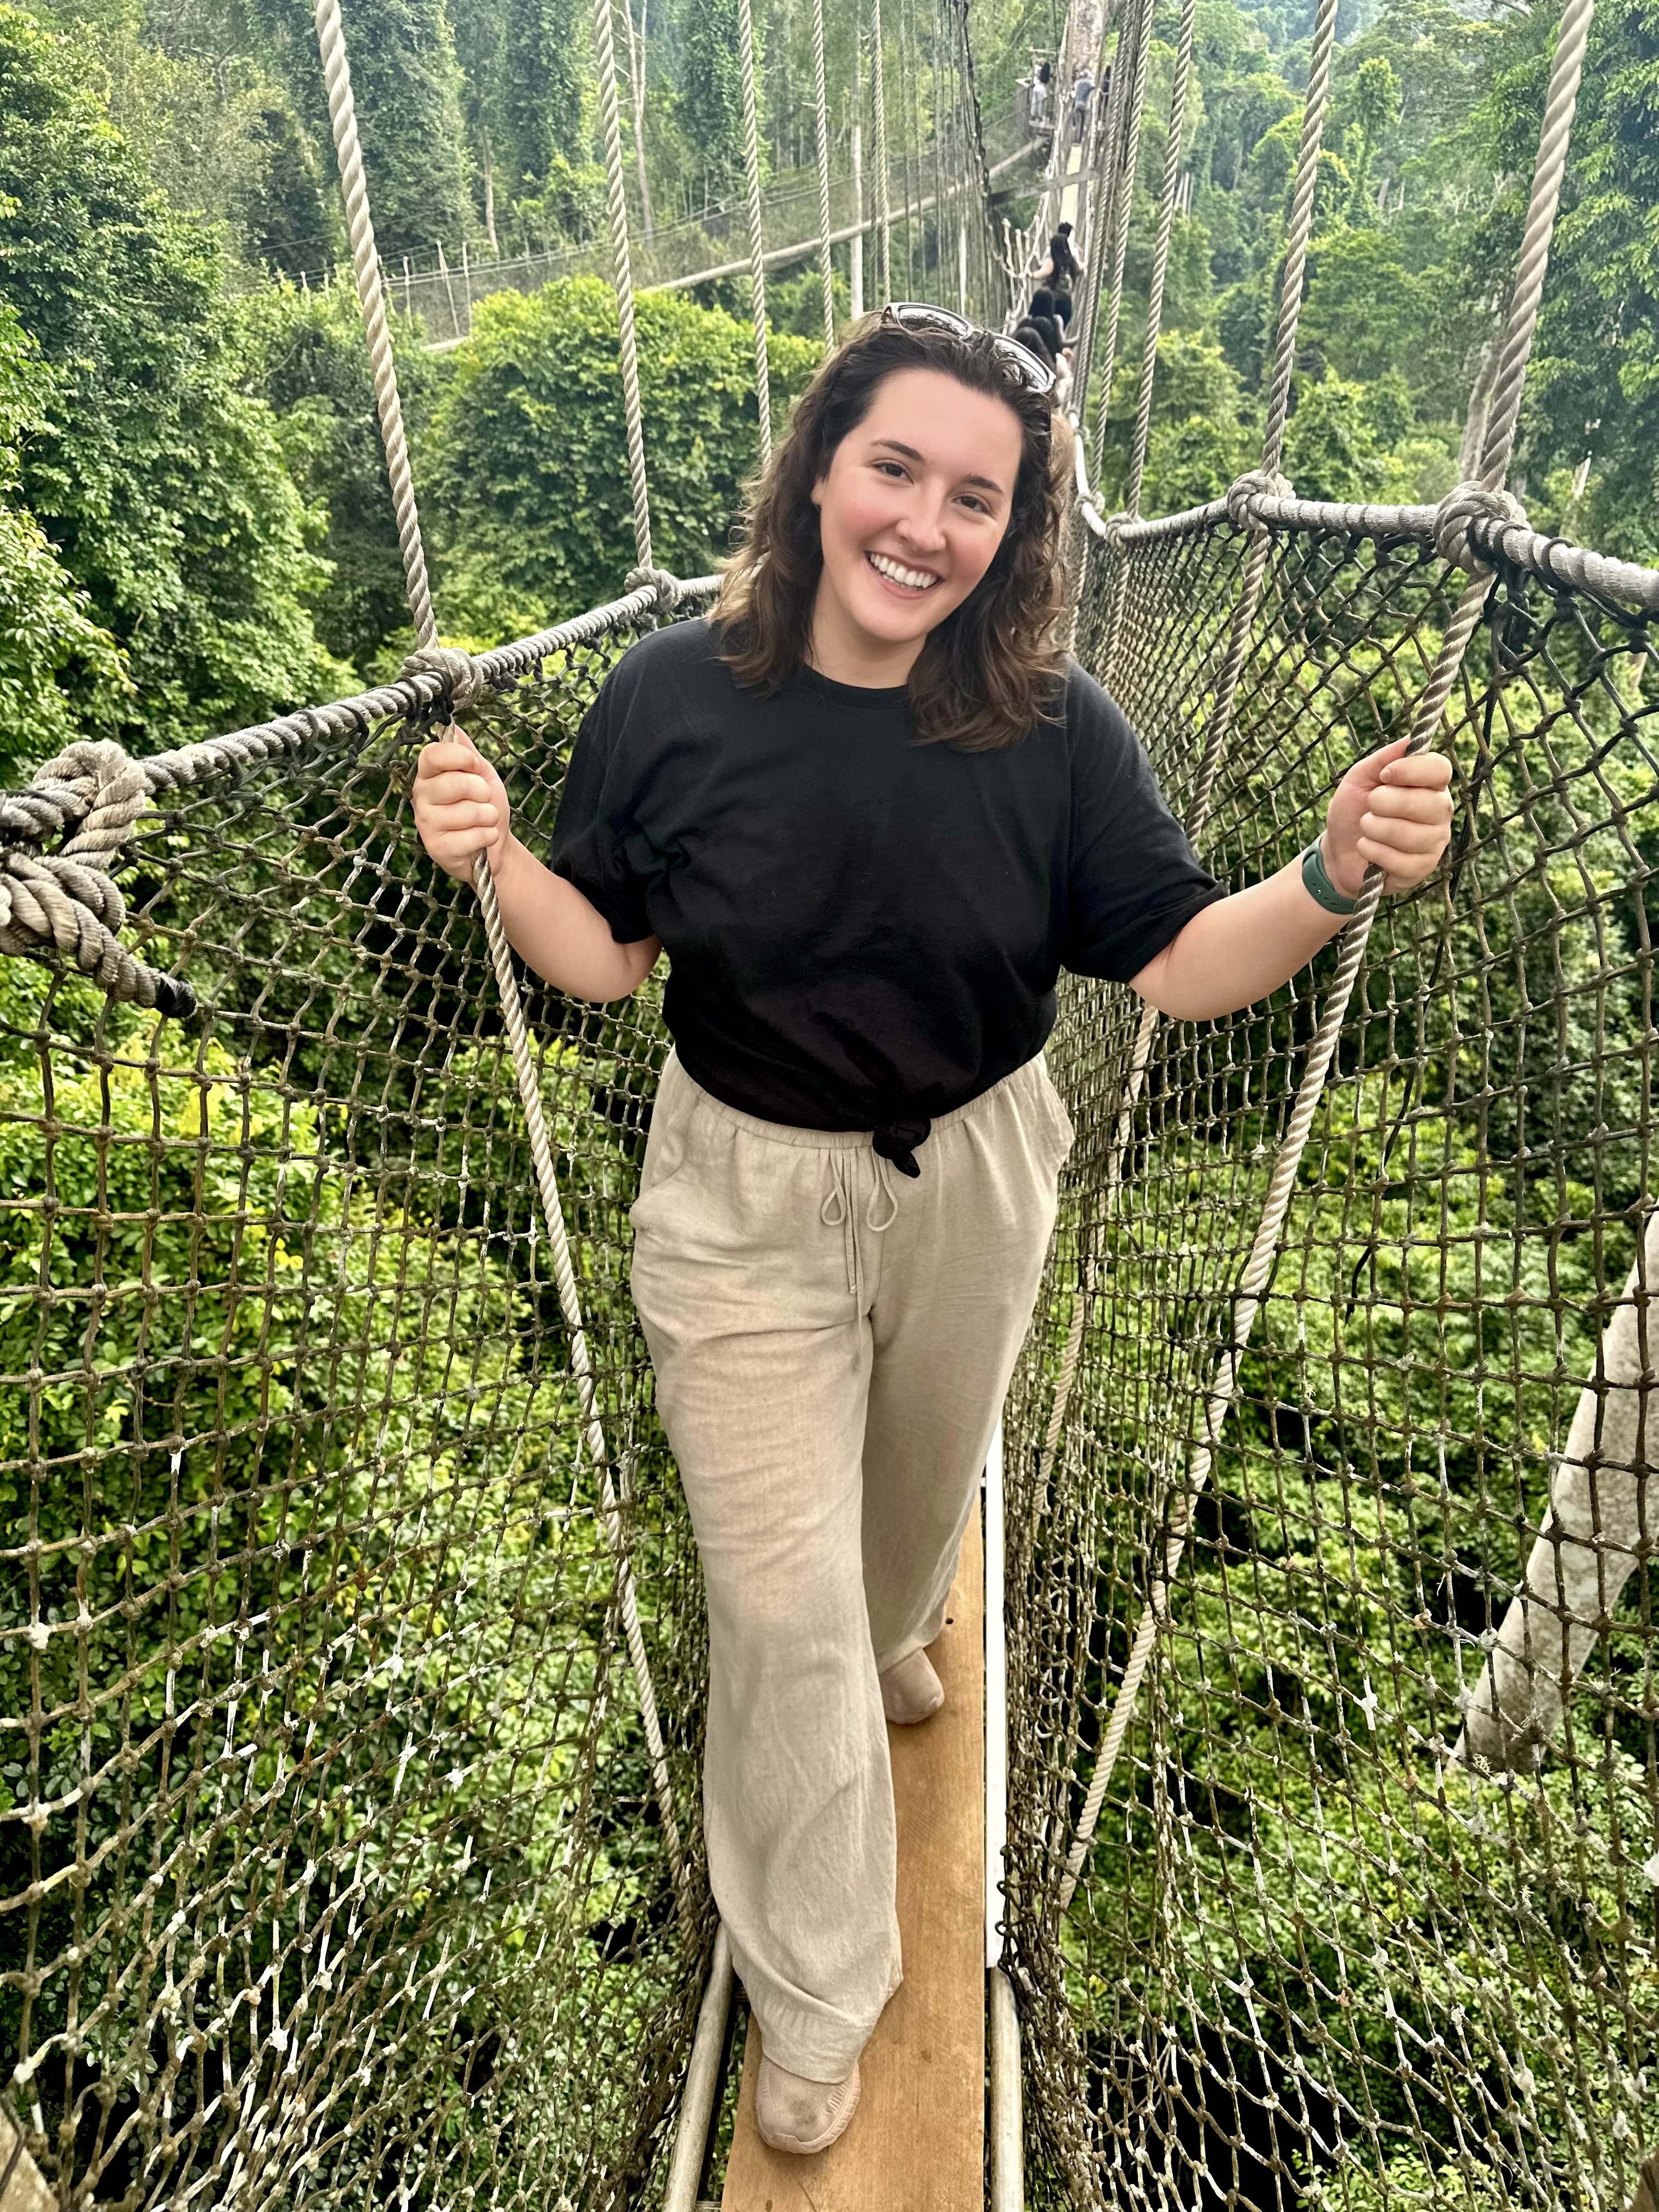 a woman wearing a black tshirt and khaki pants standing on a bridge made of ropes high above the trees in Ghana